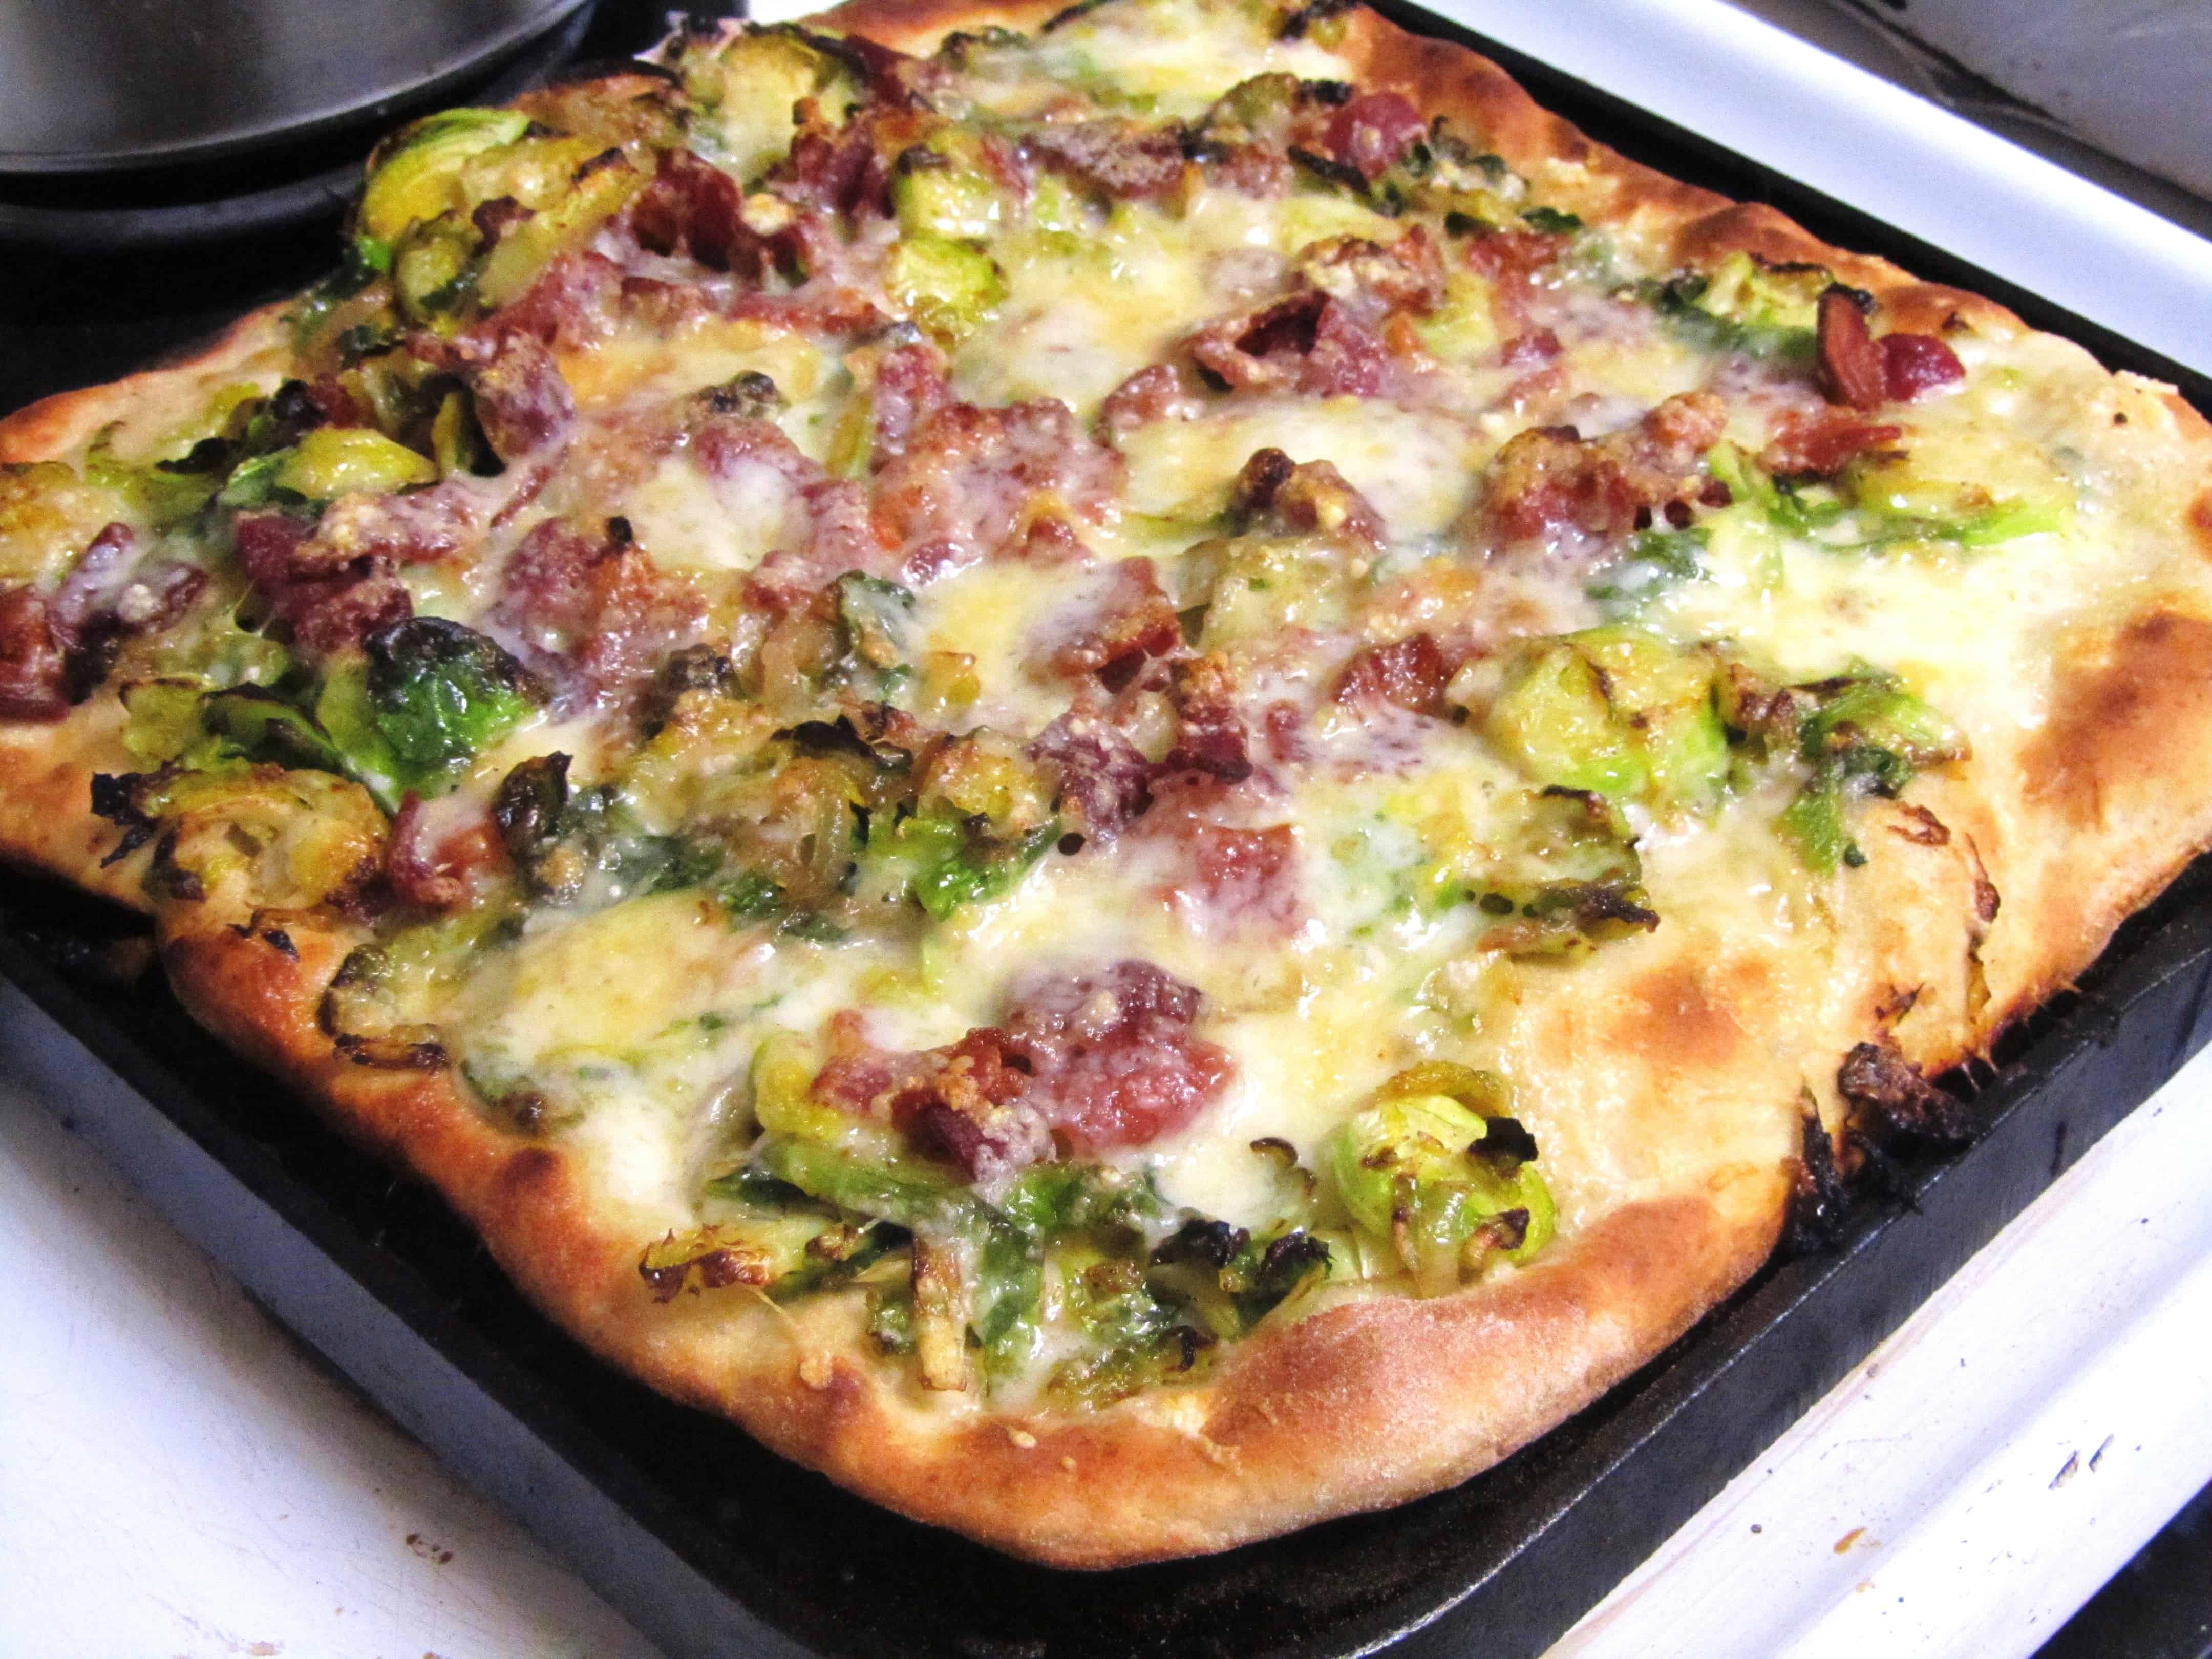 https://www.thespiffycookie.com/wp-content/uploads/2013/04/Cast-Iron-Skillet-Brussels-Sprouts-Bacon-Pizza.jpg